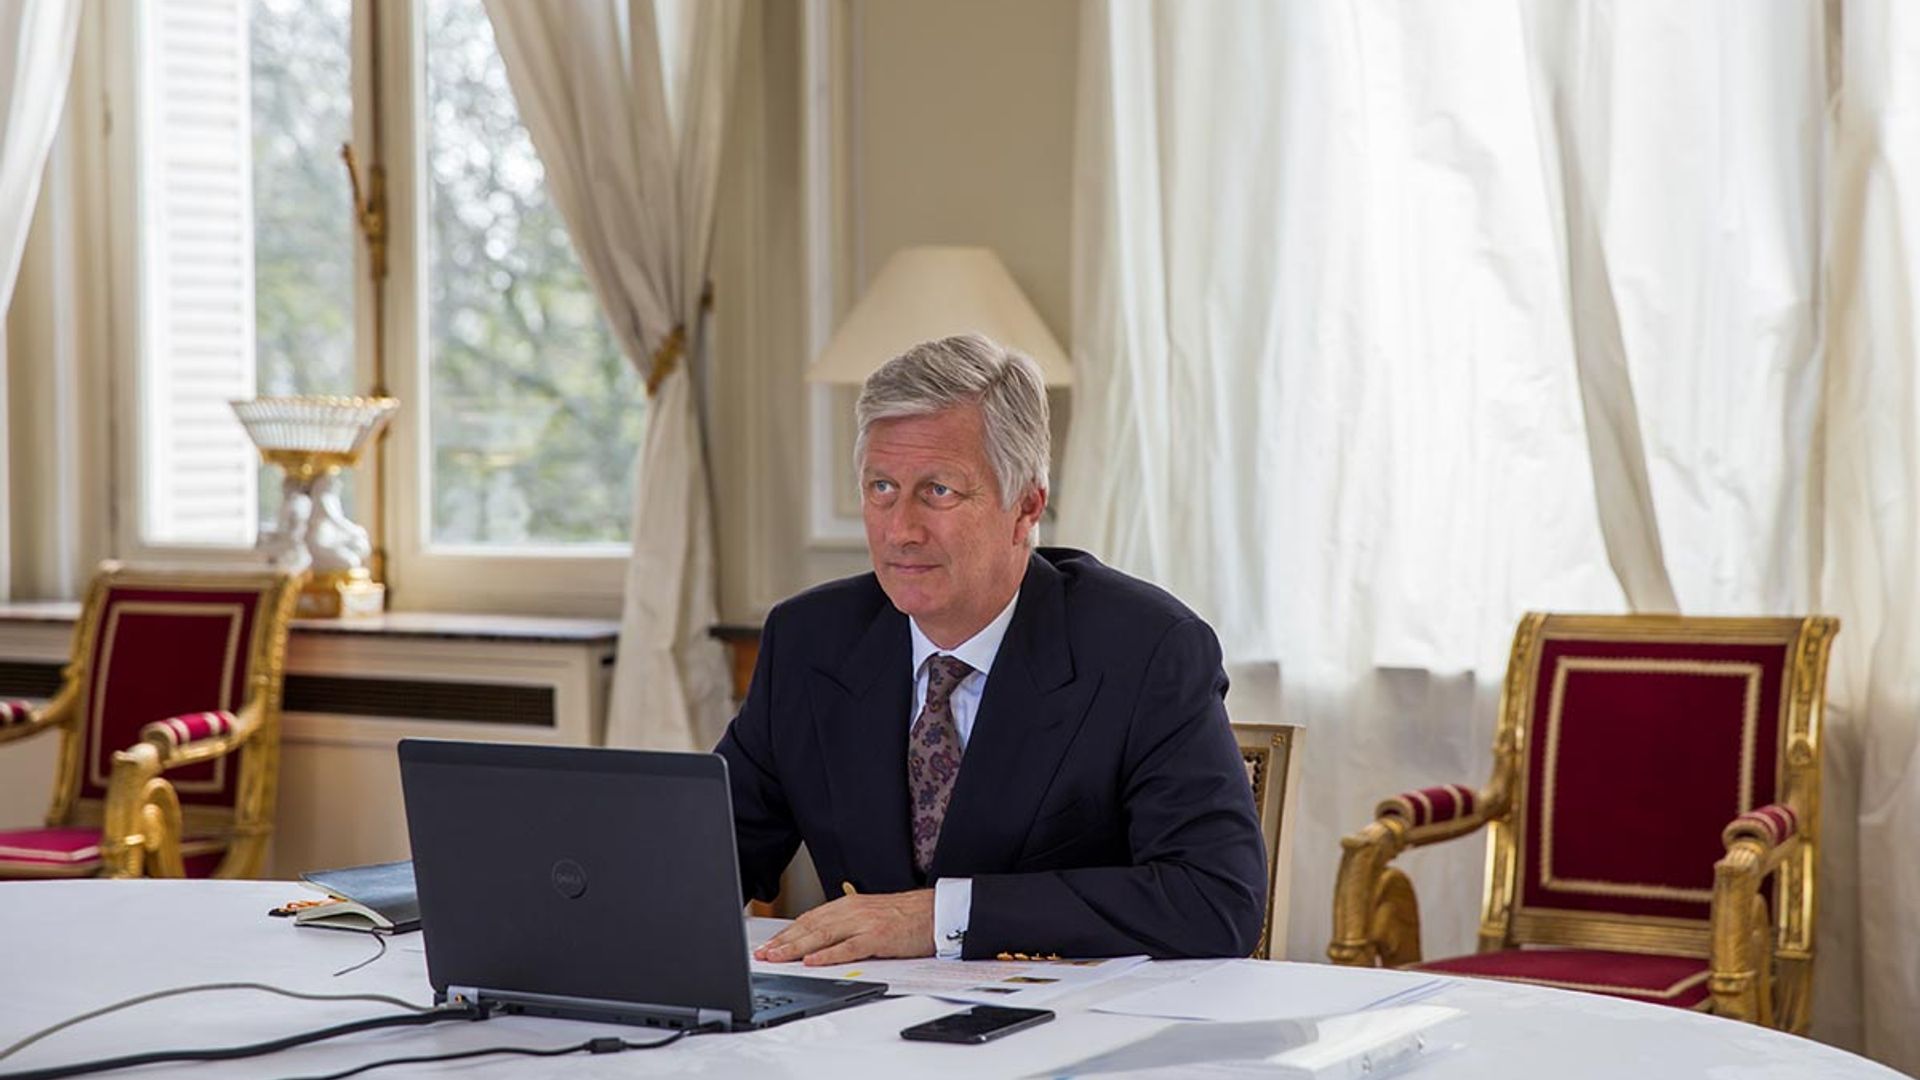 The Queen and King of Belgium reveal their fairytale home office amid coronavirus